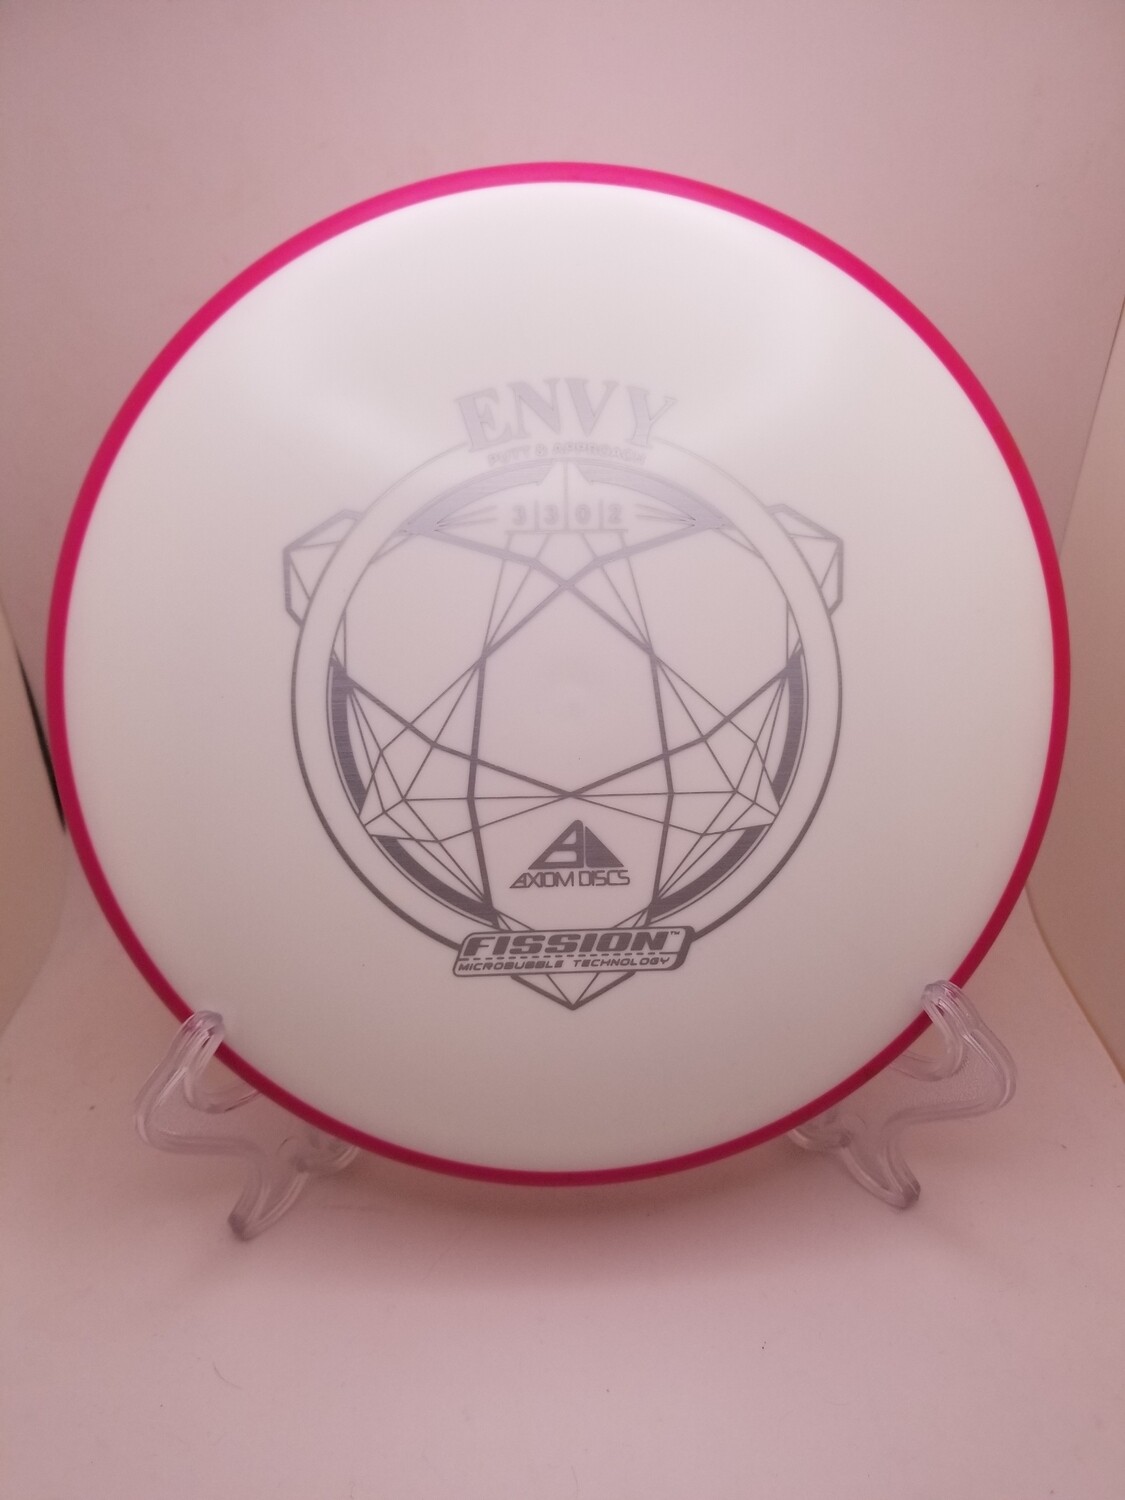 Axiom Discs Envy White with Pink Rim 172g Stamped Fission